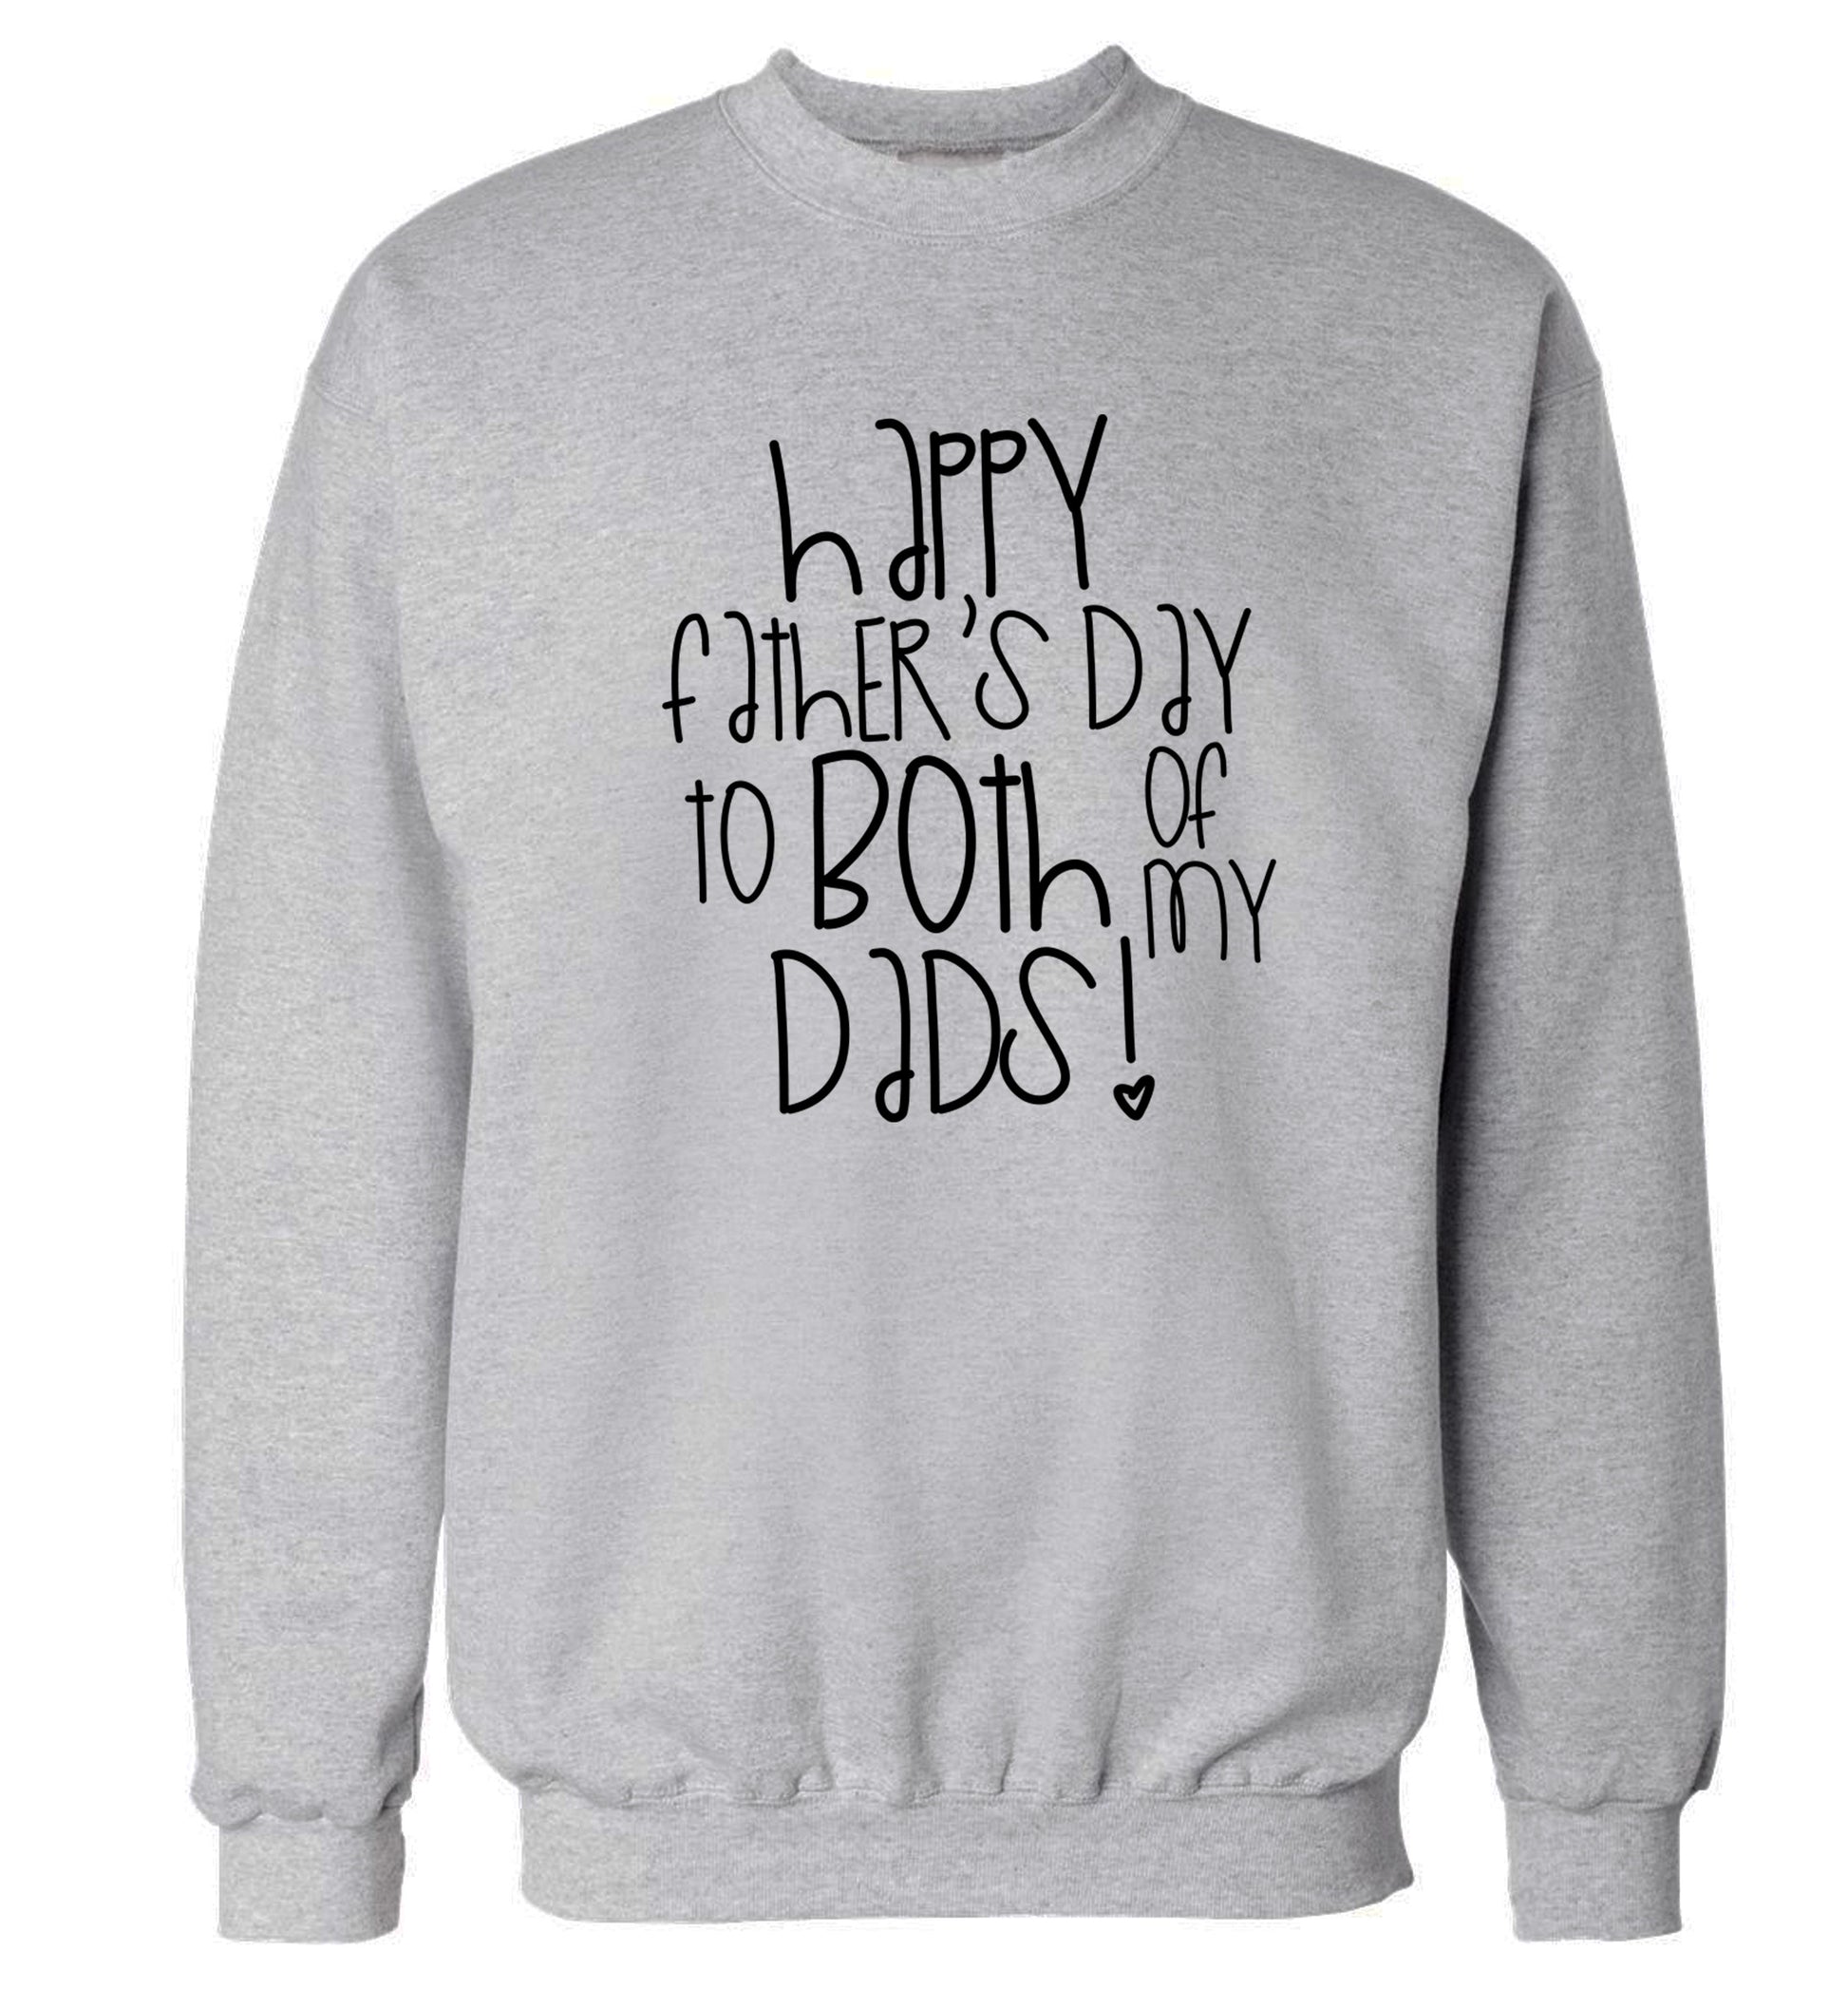 Happy father's day to both of my dads Adult's unisex grey Sweater 2XL